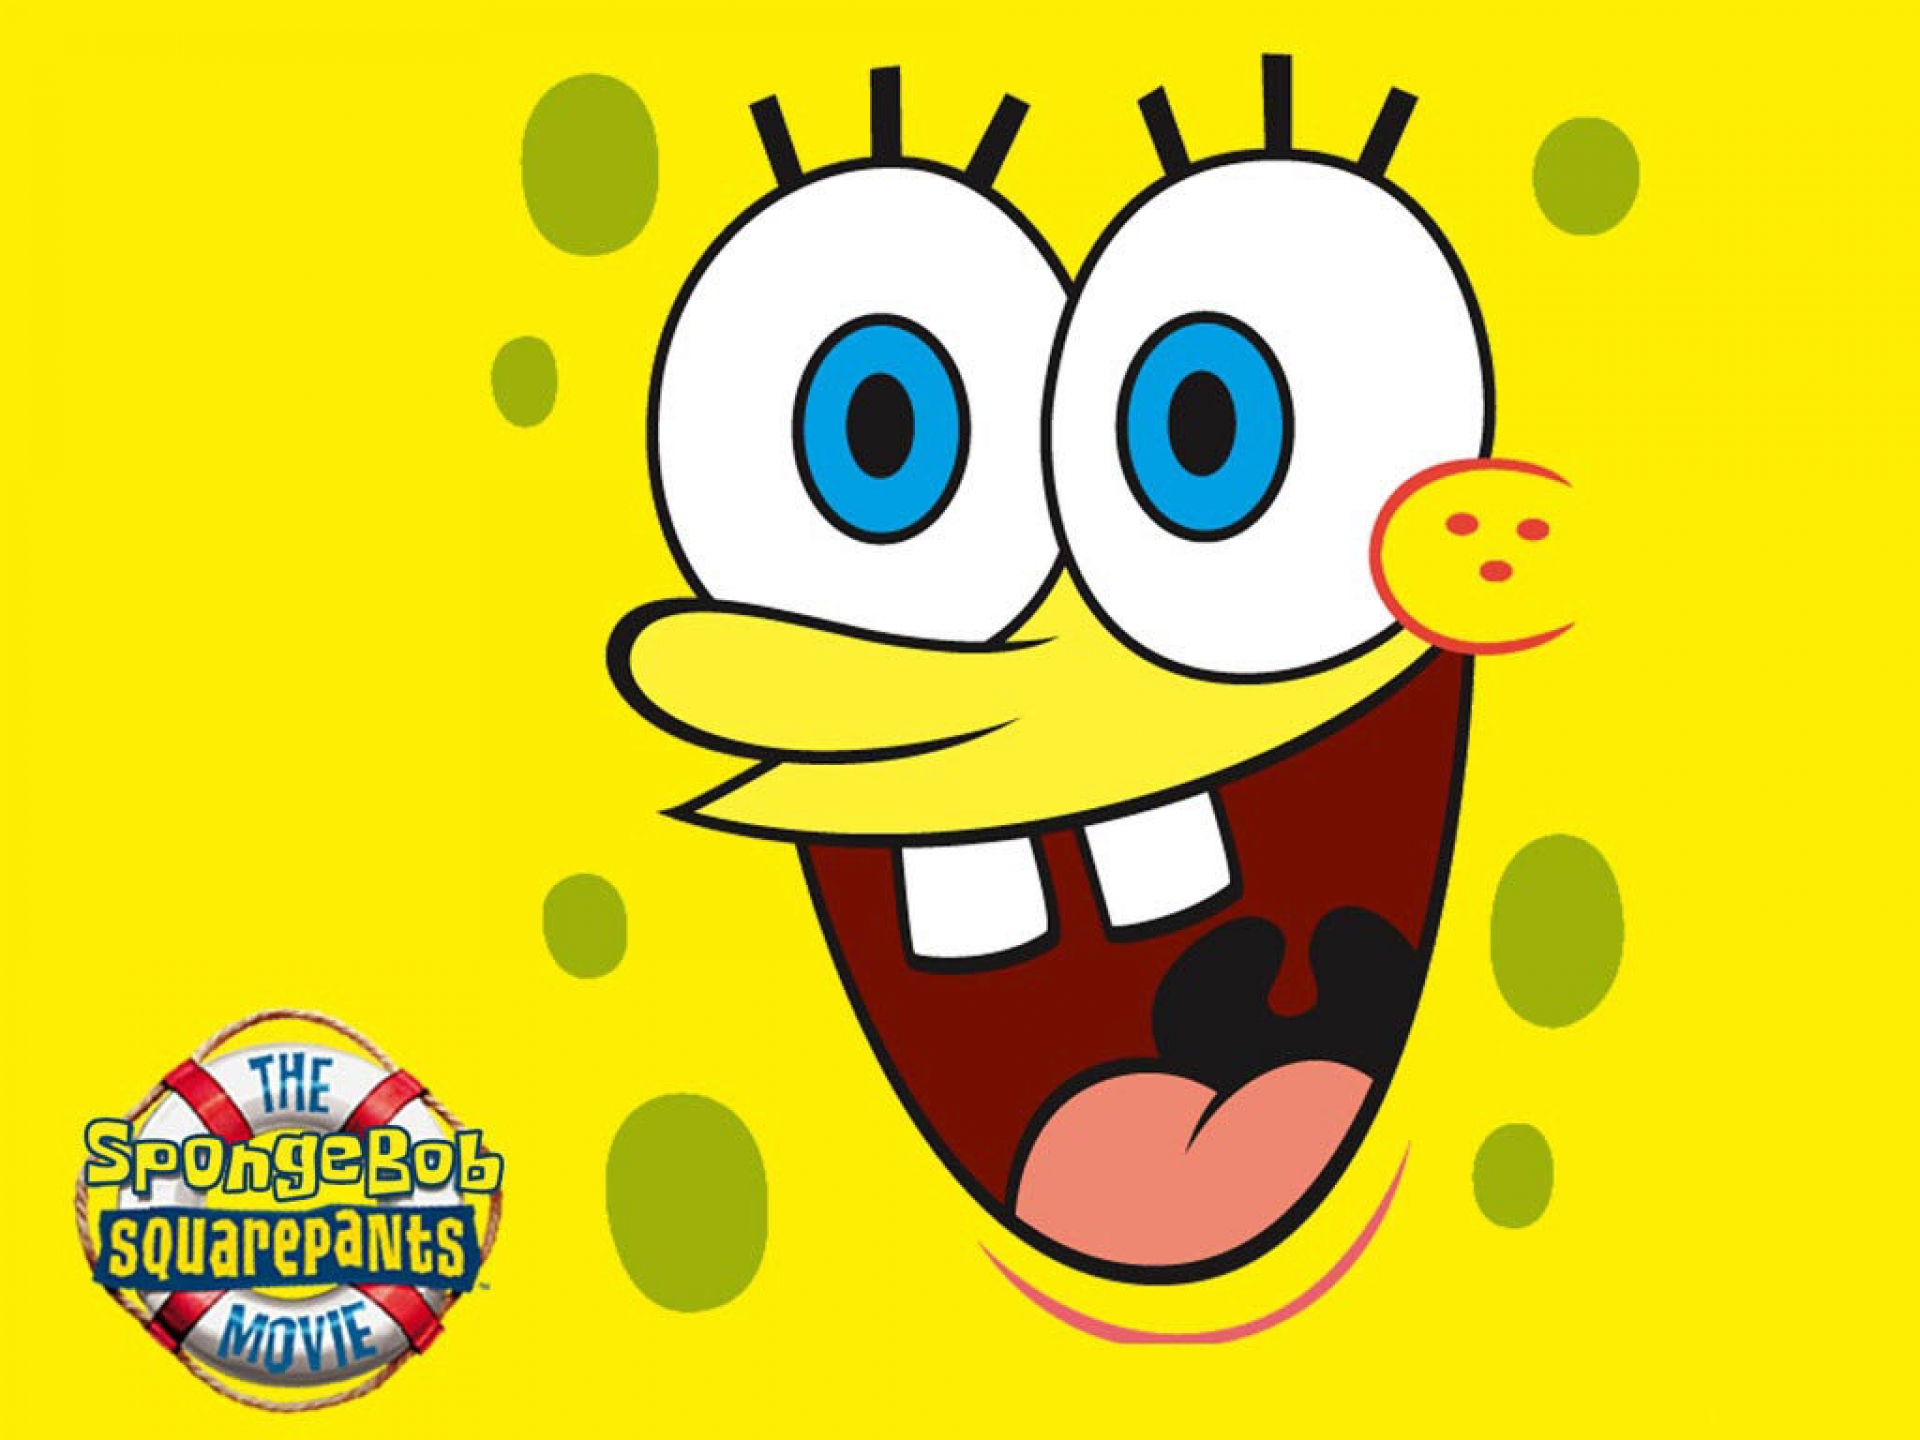 Funny Face Cartoon | Free Download Clip Art | Free Clip Art | on ...